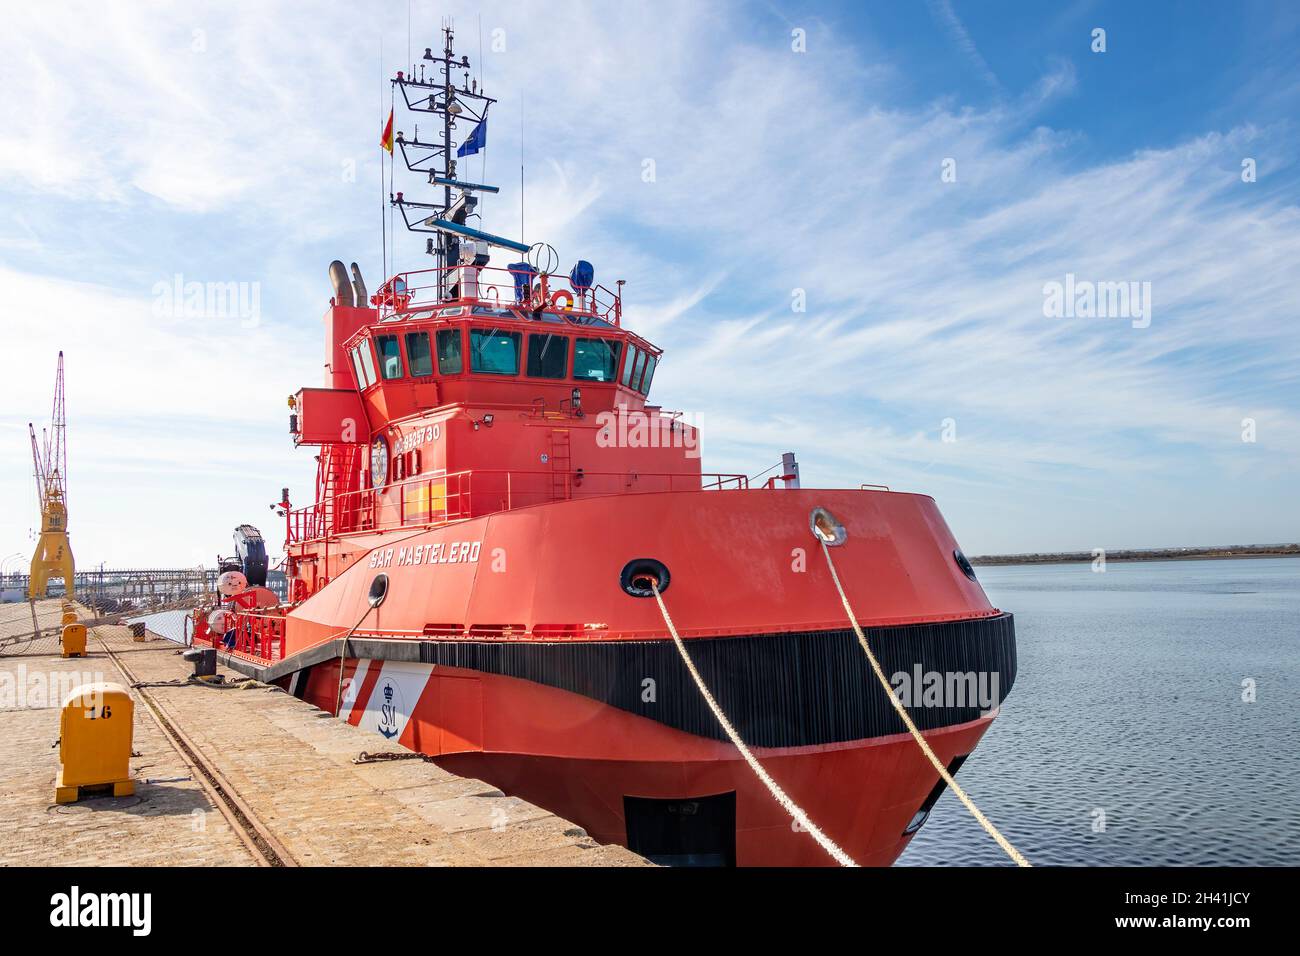 Huelva, Spain - October 25, 2021: Rescue ship SAR Mastelero (BS-23) moored in Huelva port. It is a high-altitude tug of the Maritime Safety and Rescue Stock Photo